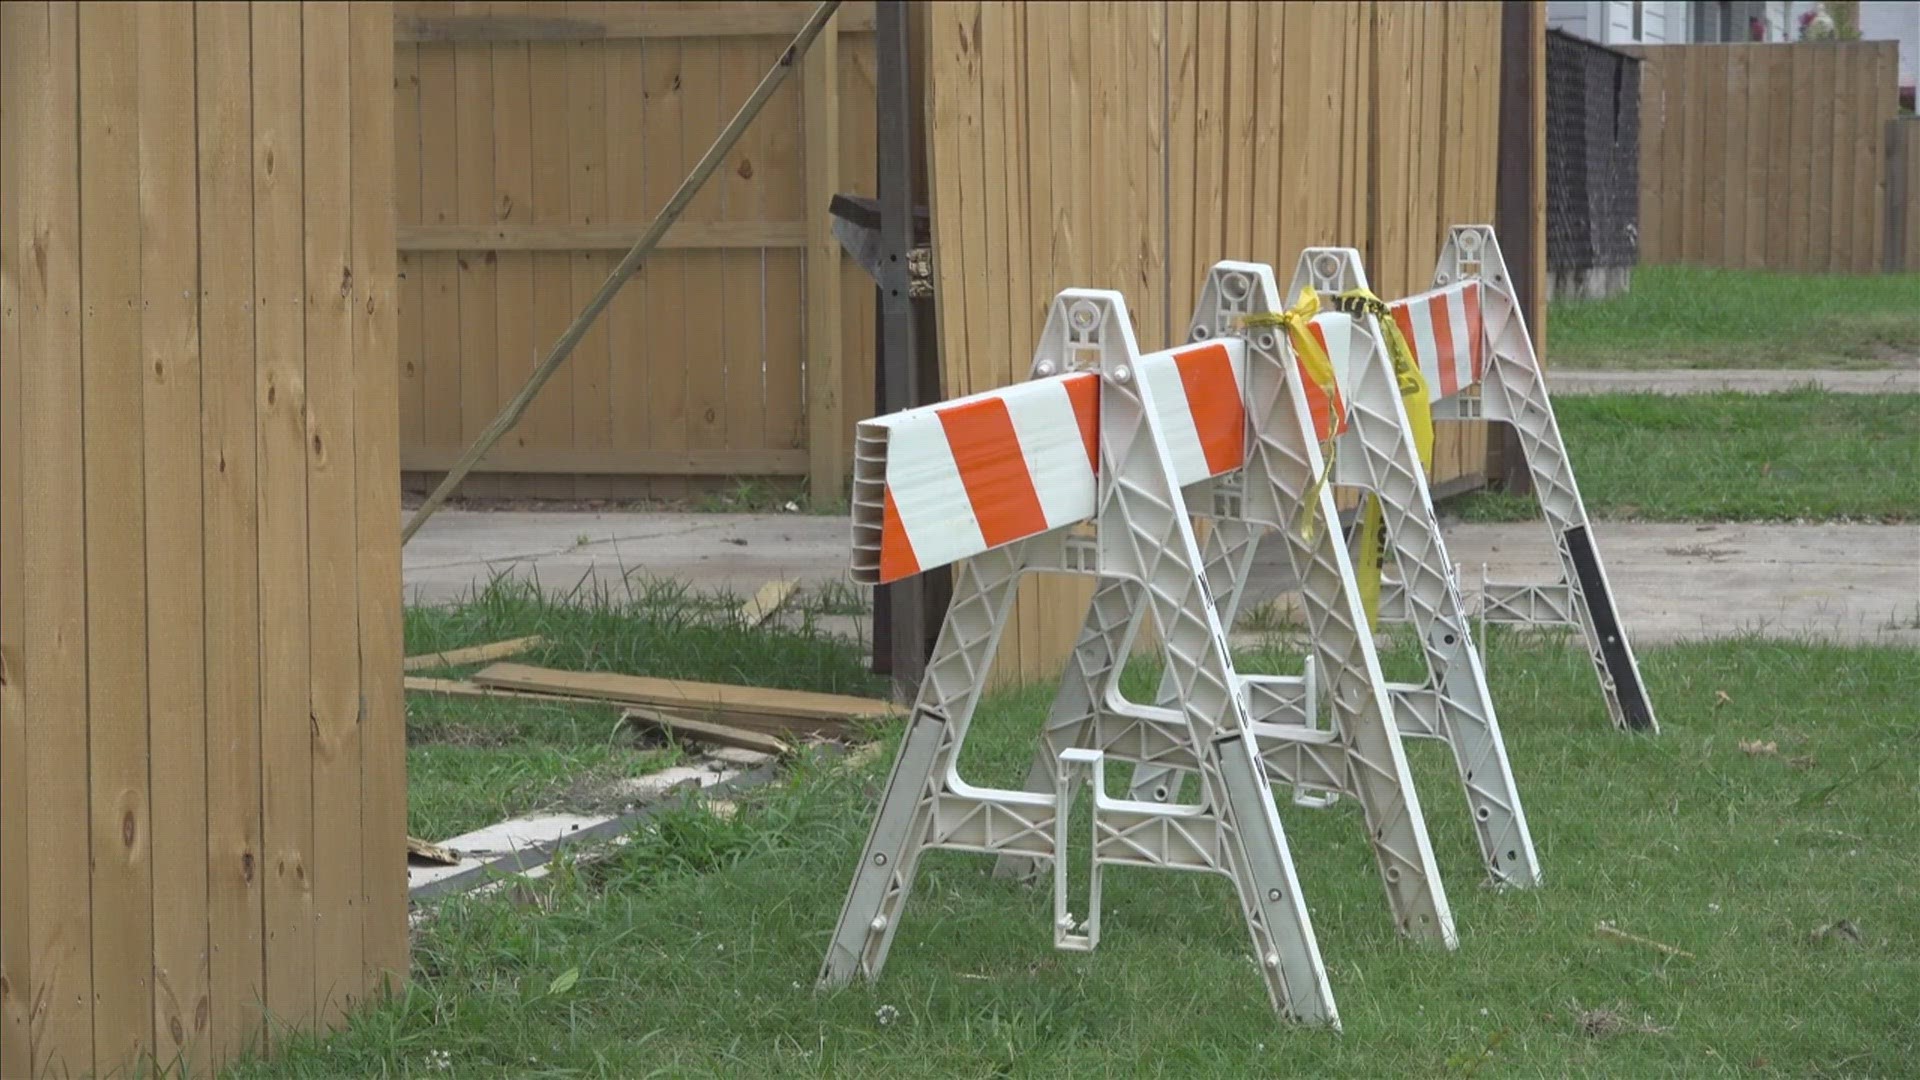 Memphis residents living near Jackson Avenue at Trezevant Street are calling for change after speeding drivers continue to cause damage to their neighborhood.